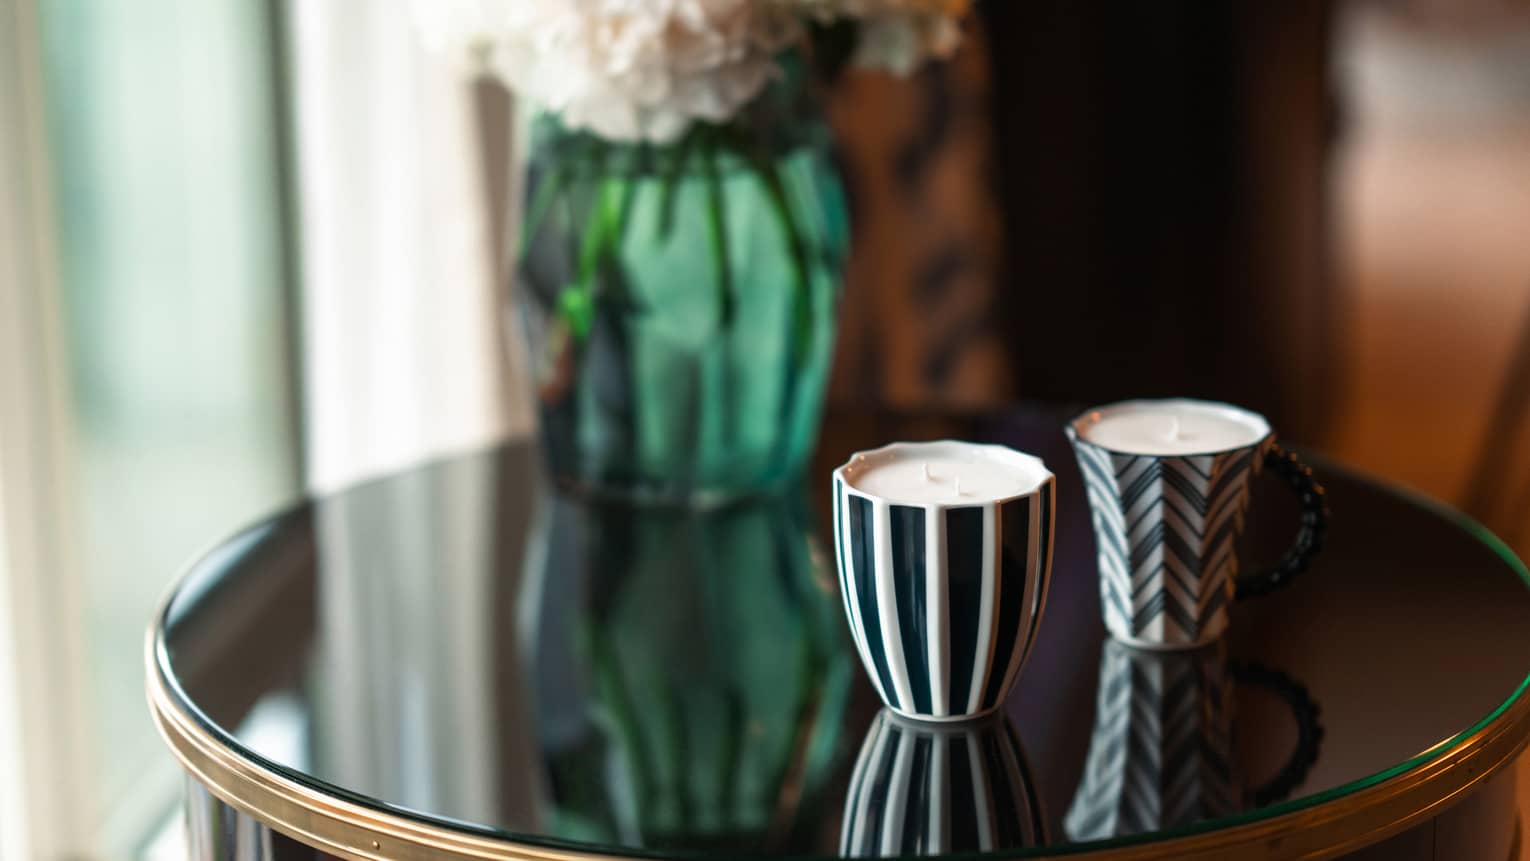 Two black-and-white ceramic candles set on round black table with green vase in backdrop